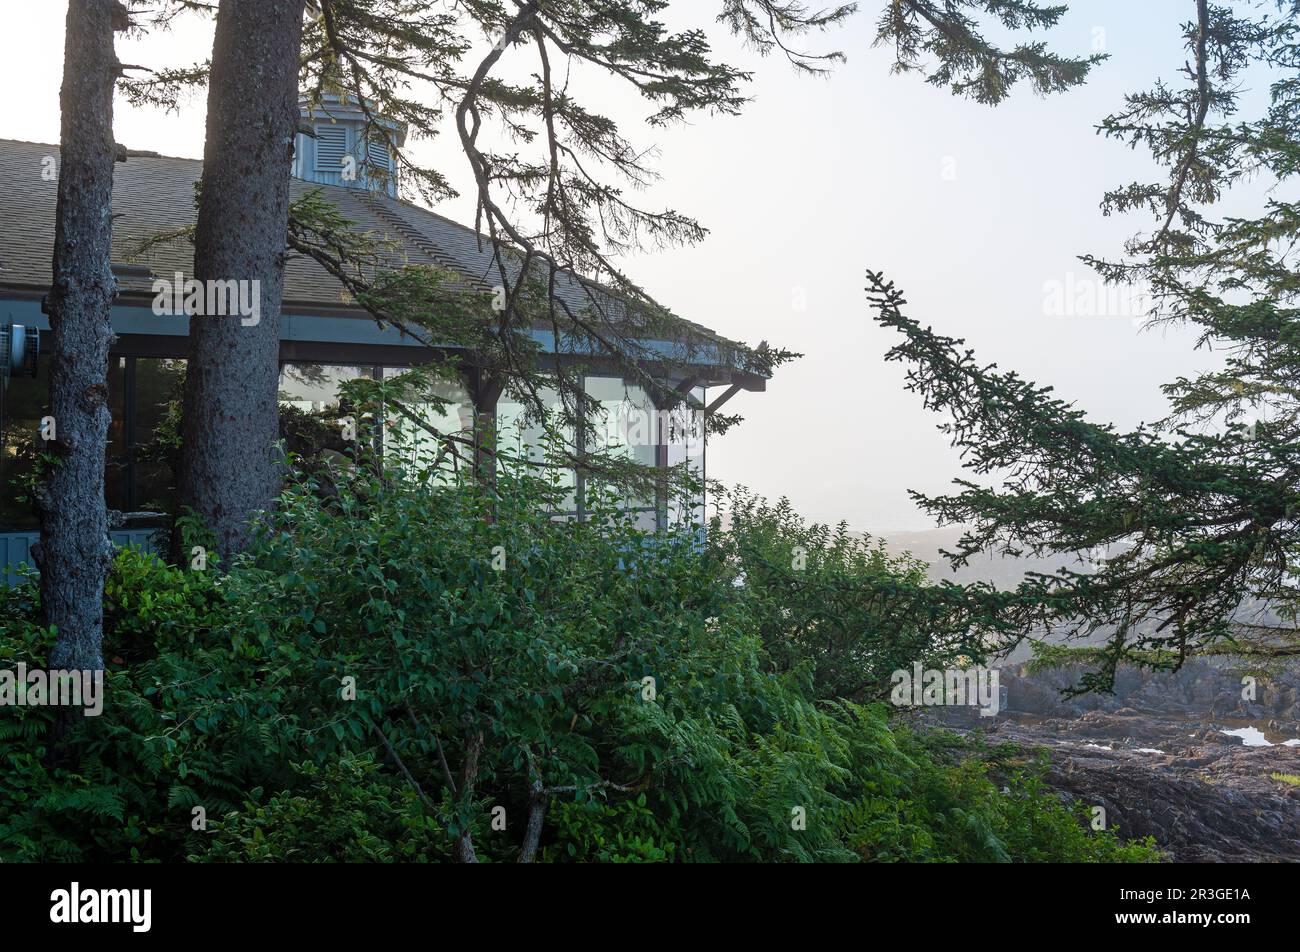 The Pointe Restaurant building in the mist by Chesterman Beach, Wickaninnish Inn, Tofino, Vancouver Island, Canada. Stock Photo